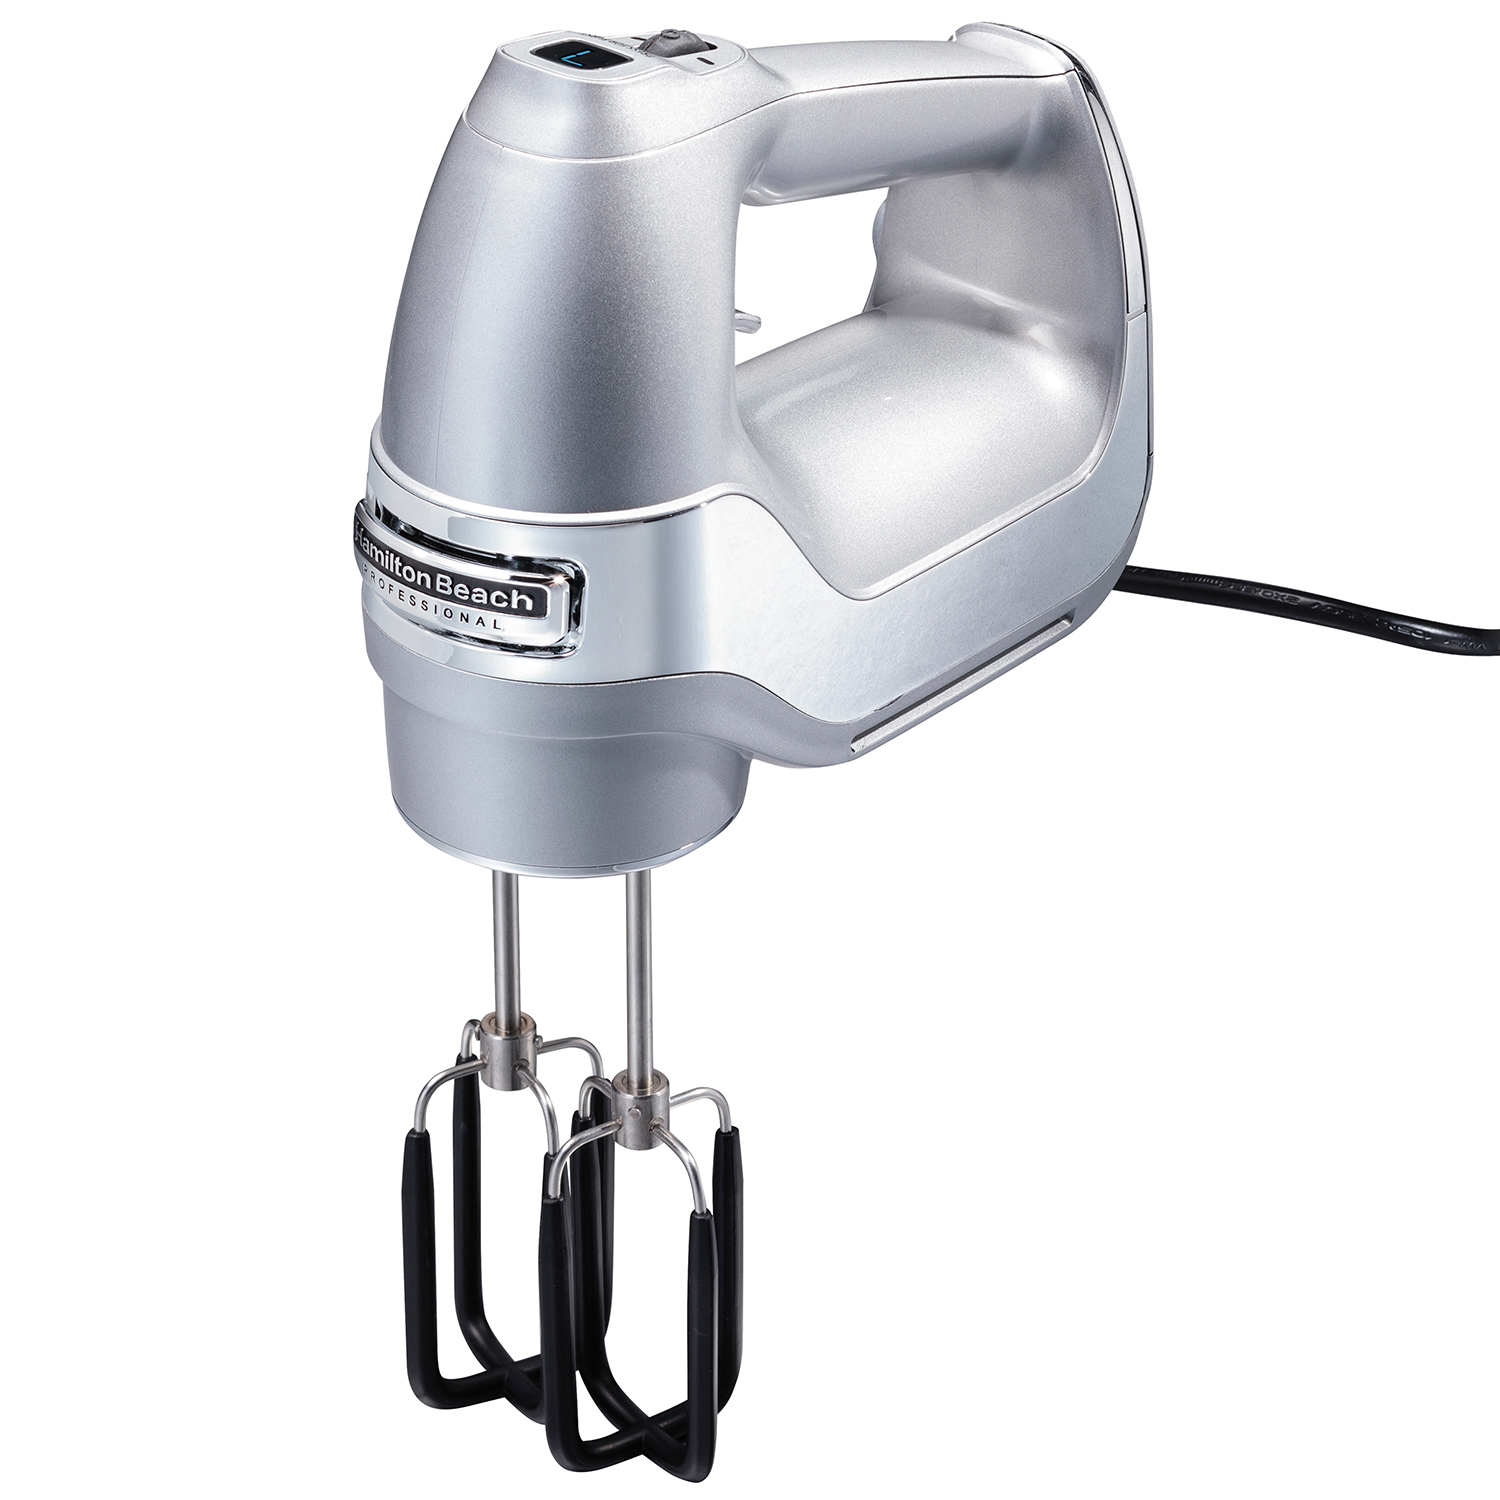 Hamilton Beach® Professional 7 Speed Hand Mixer with Snap-On Case Chrome and Silver (62657)